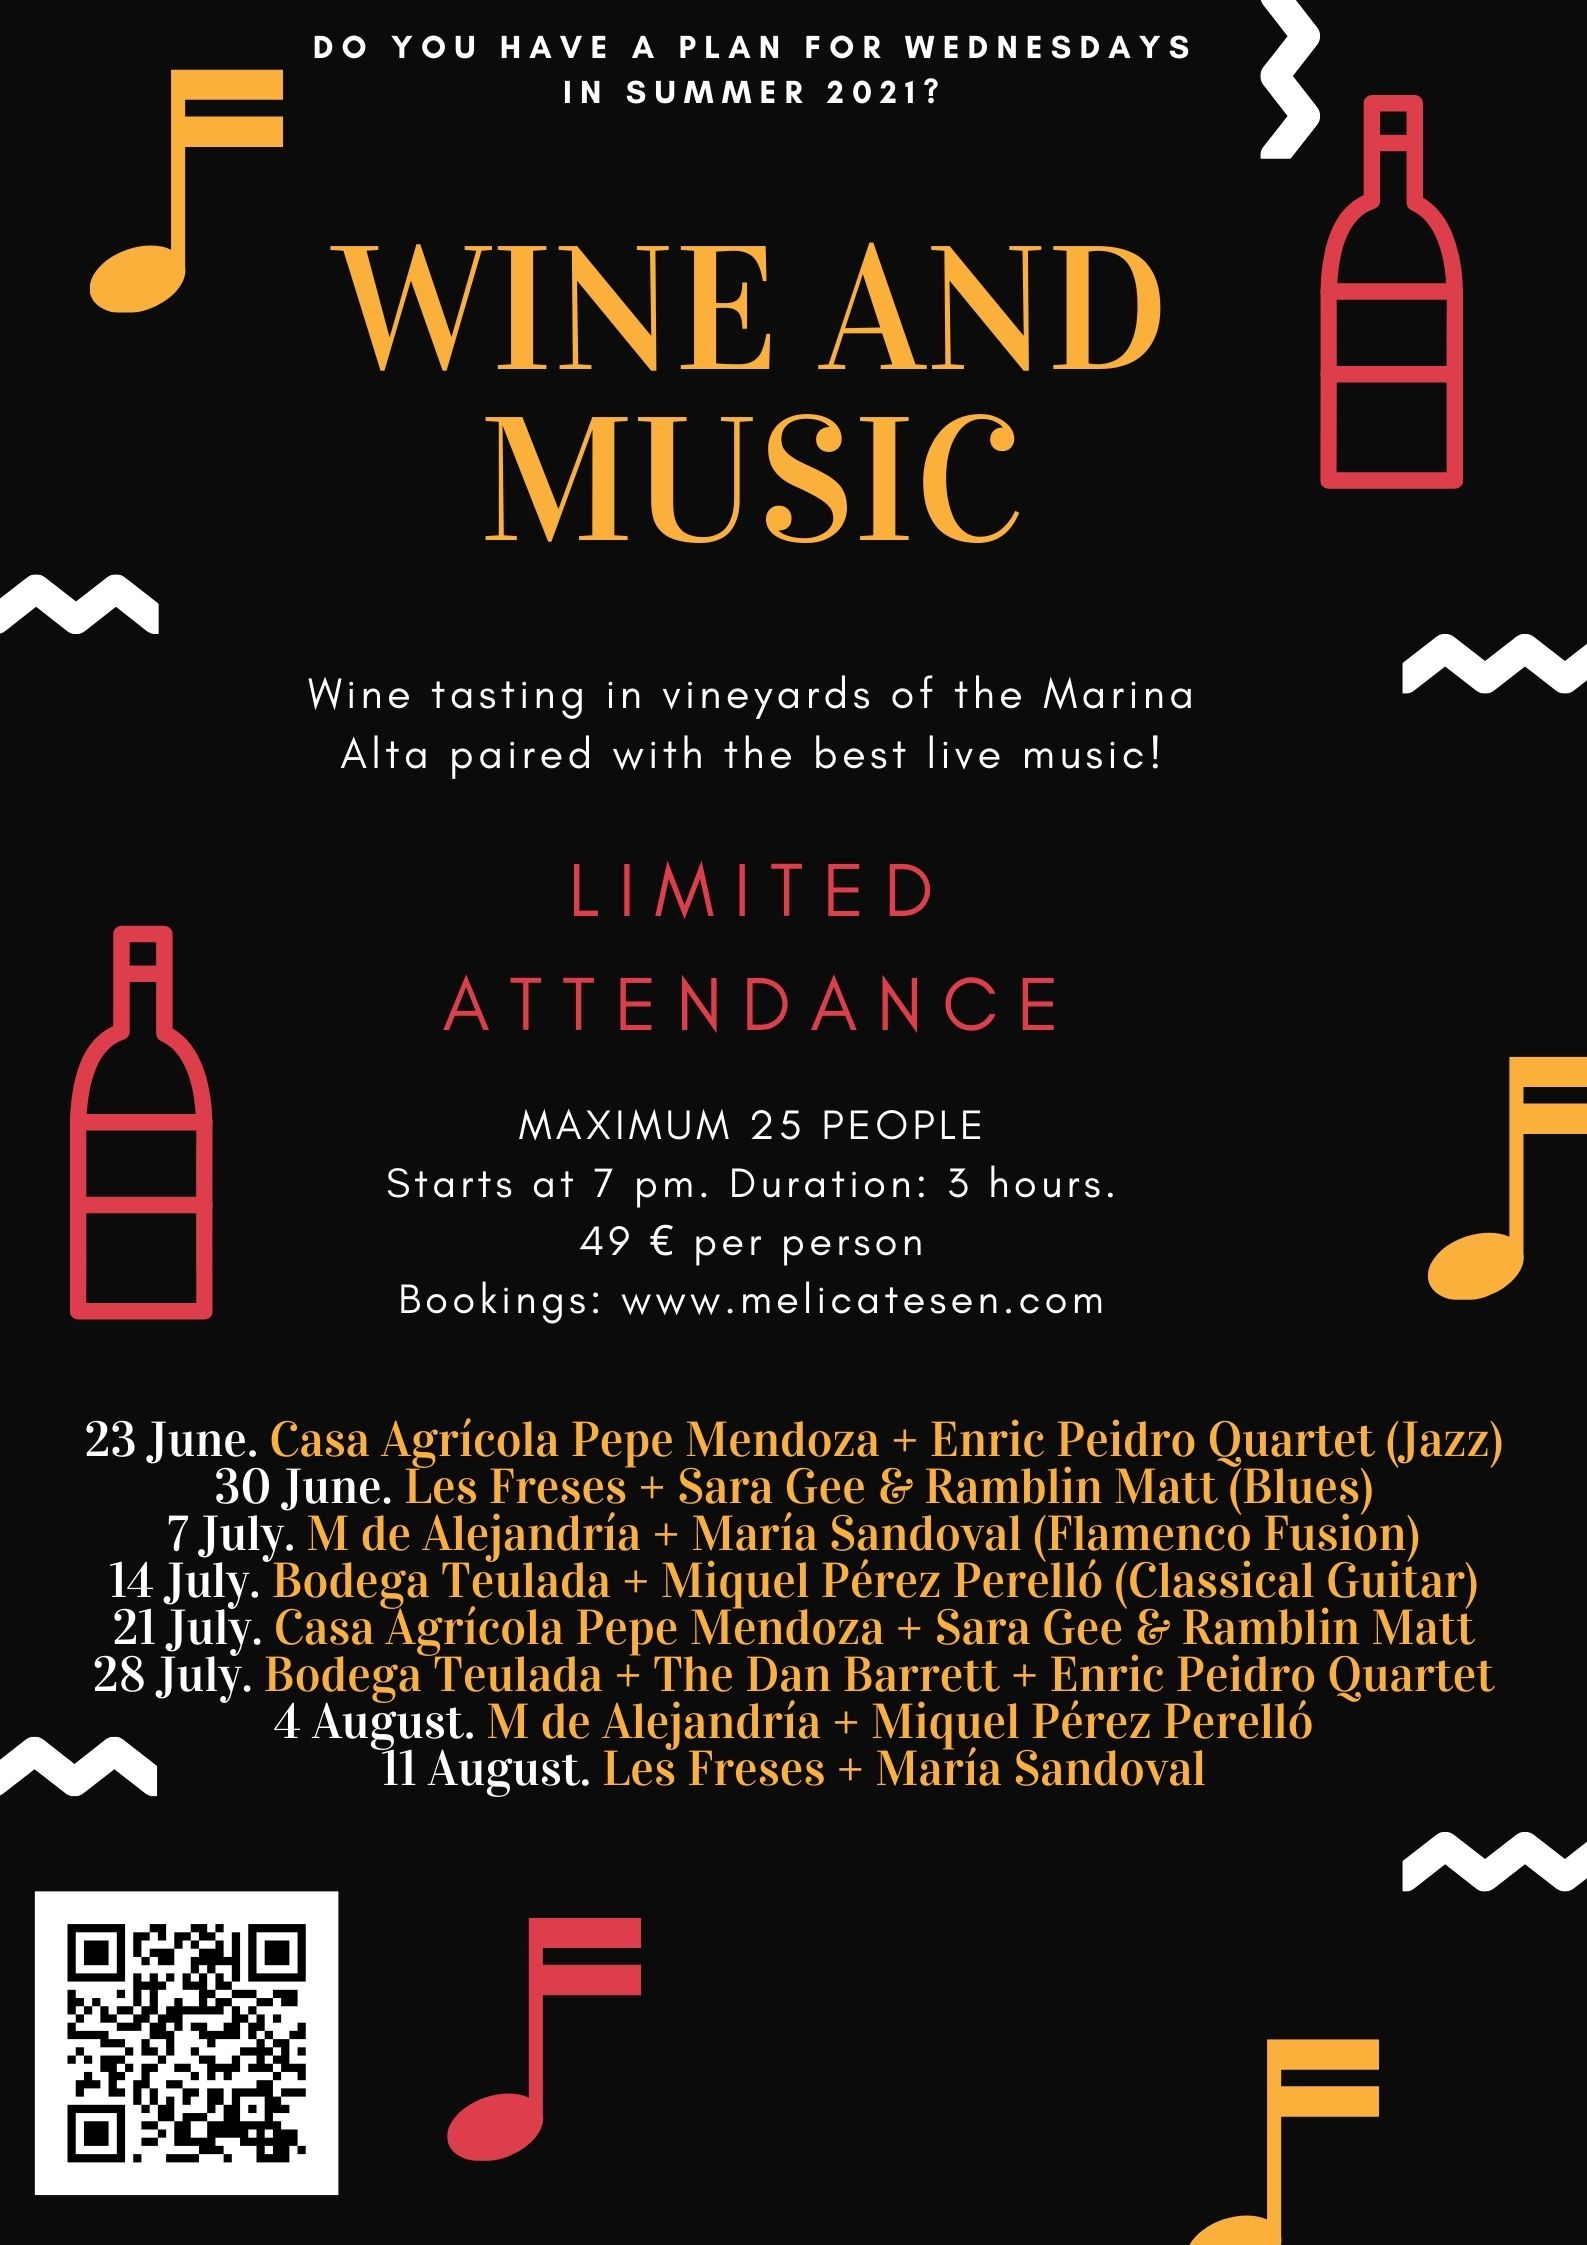 Wine and Music in Spain